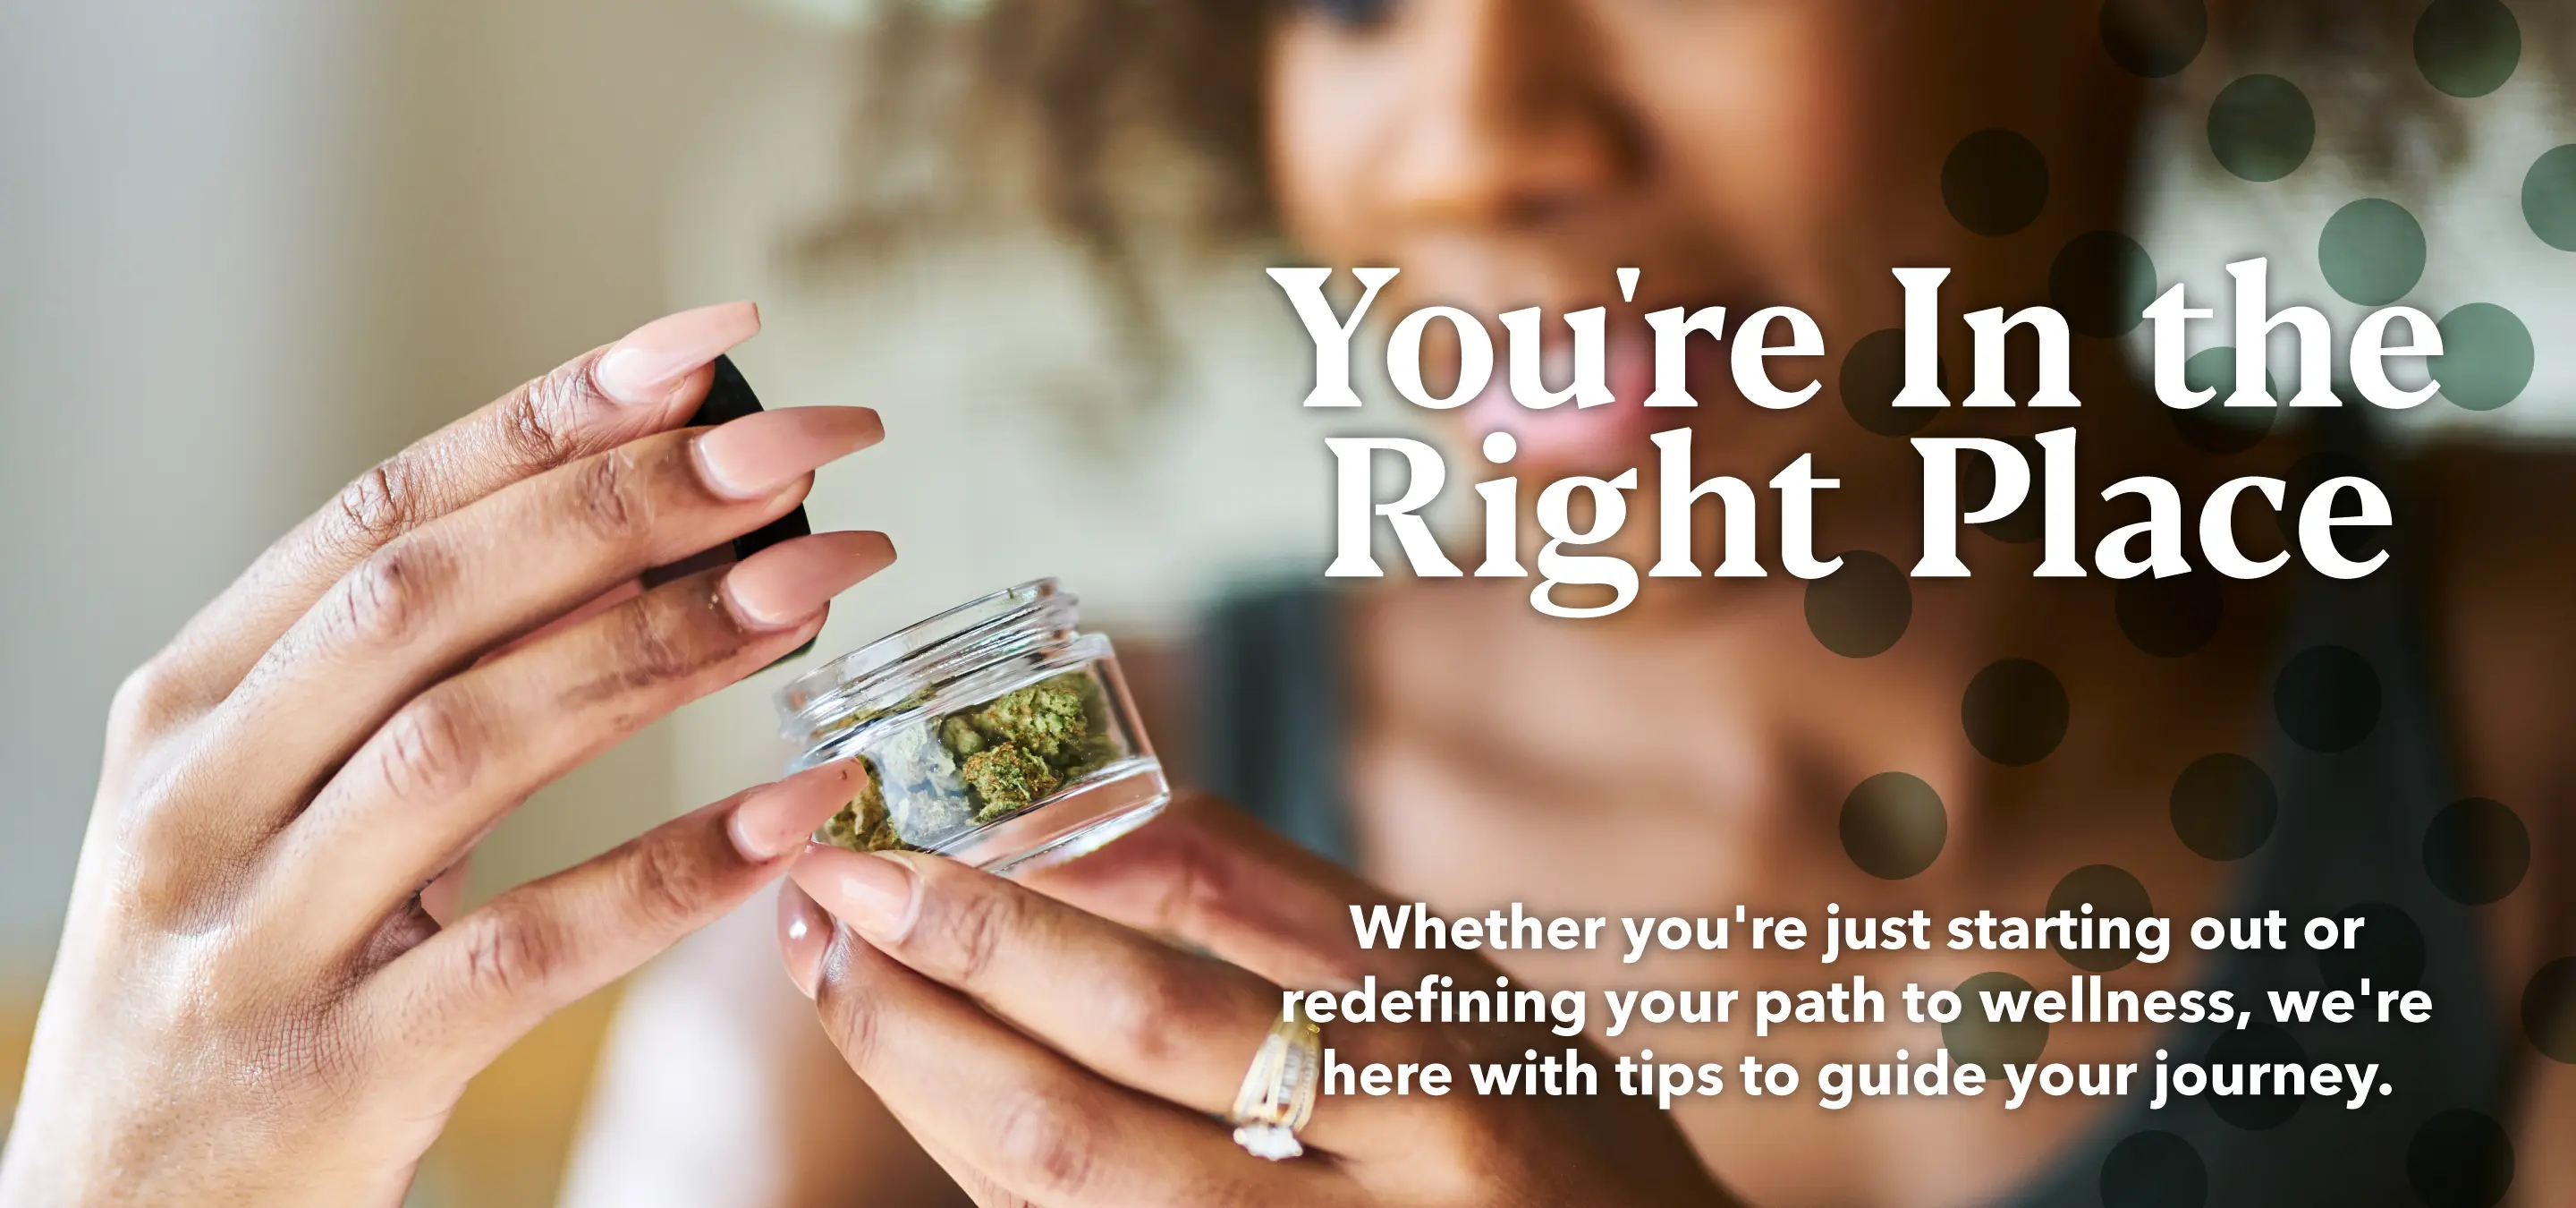 Find a Dispensary Near You